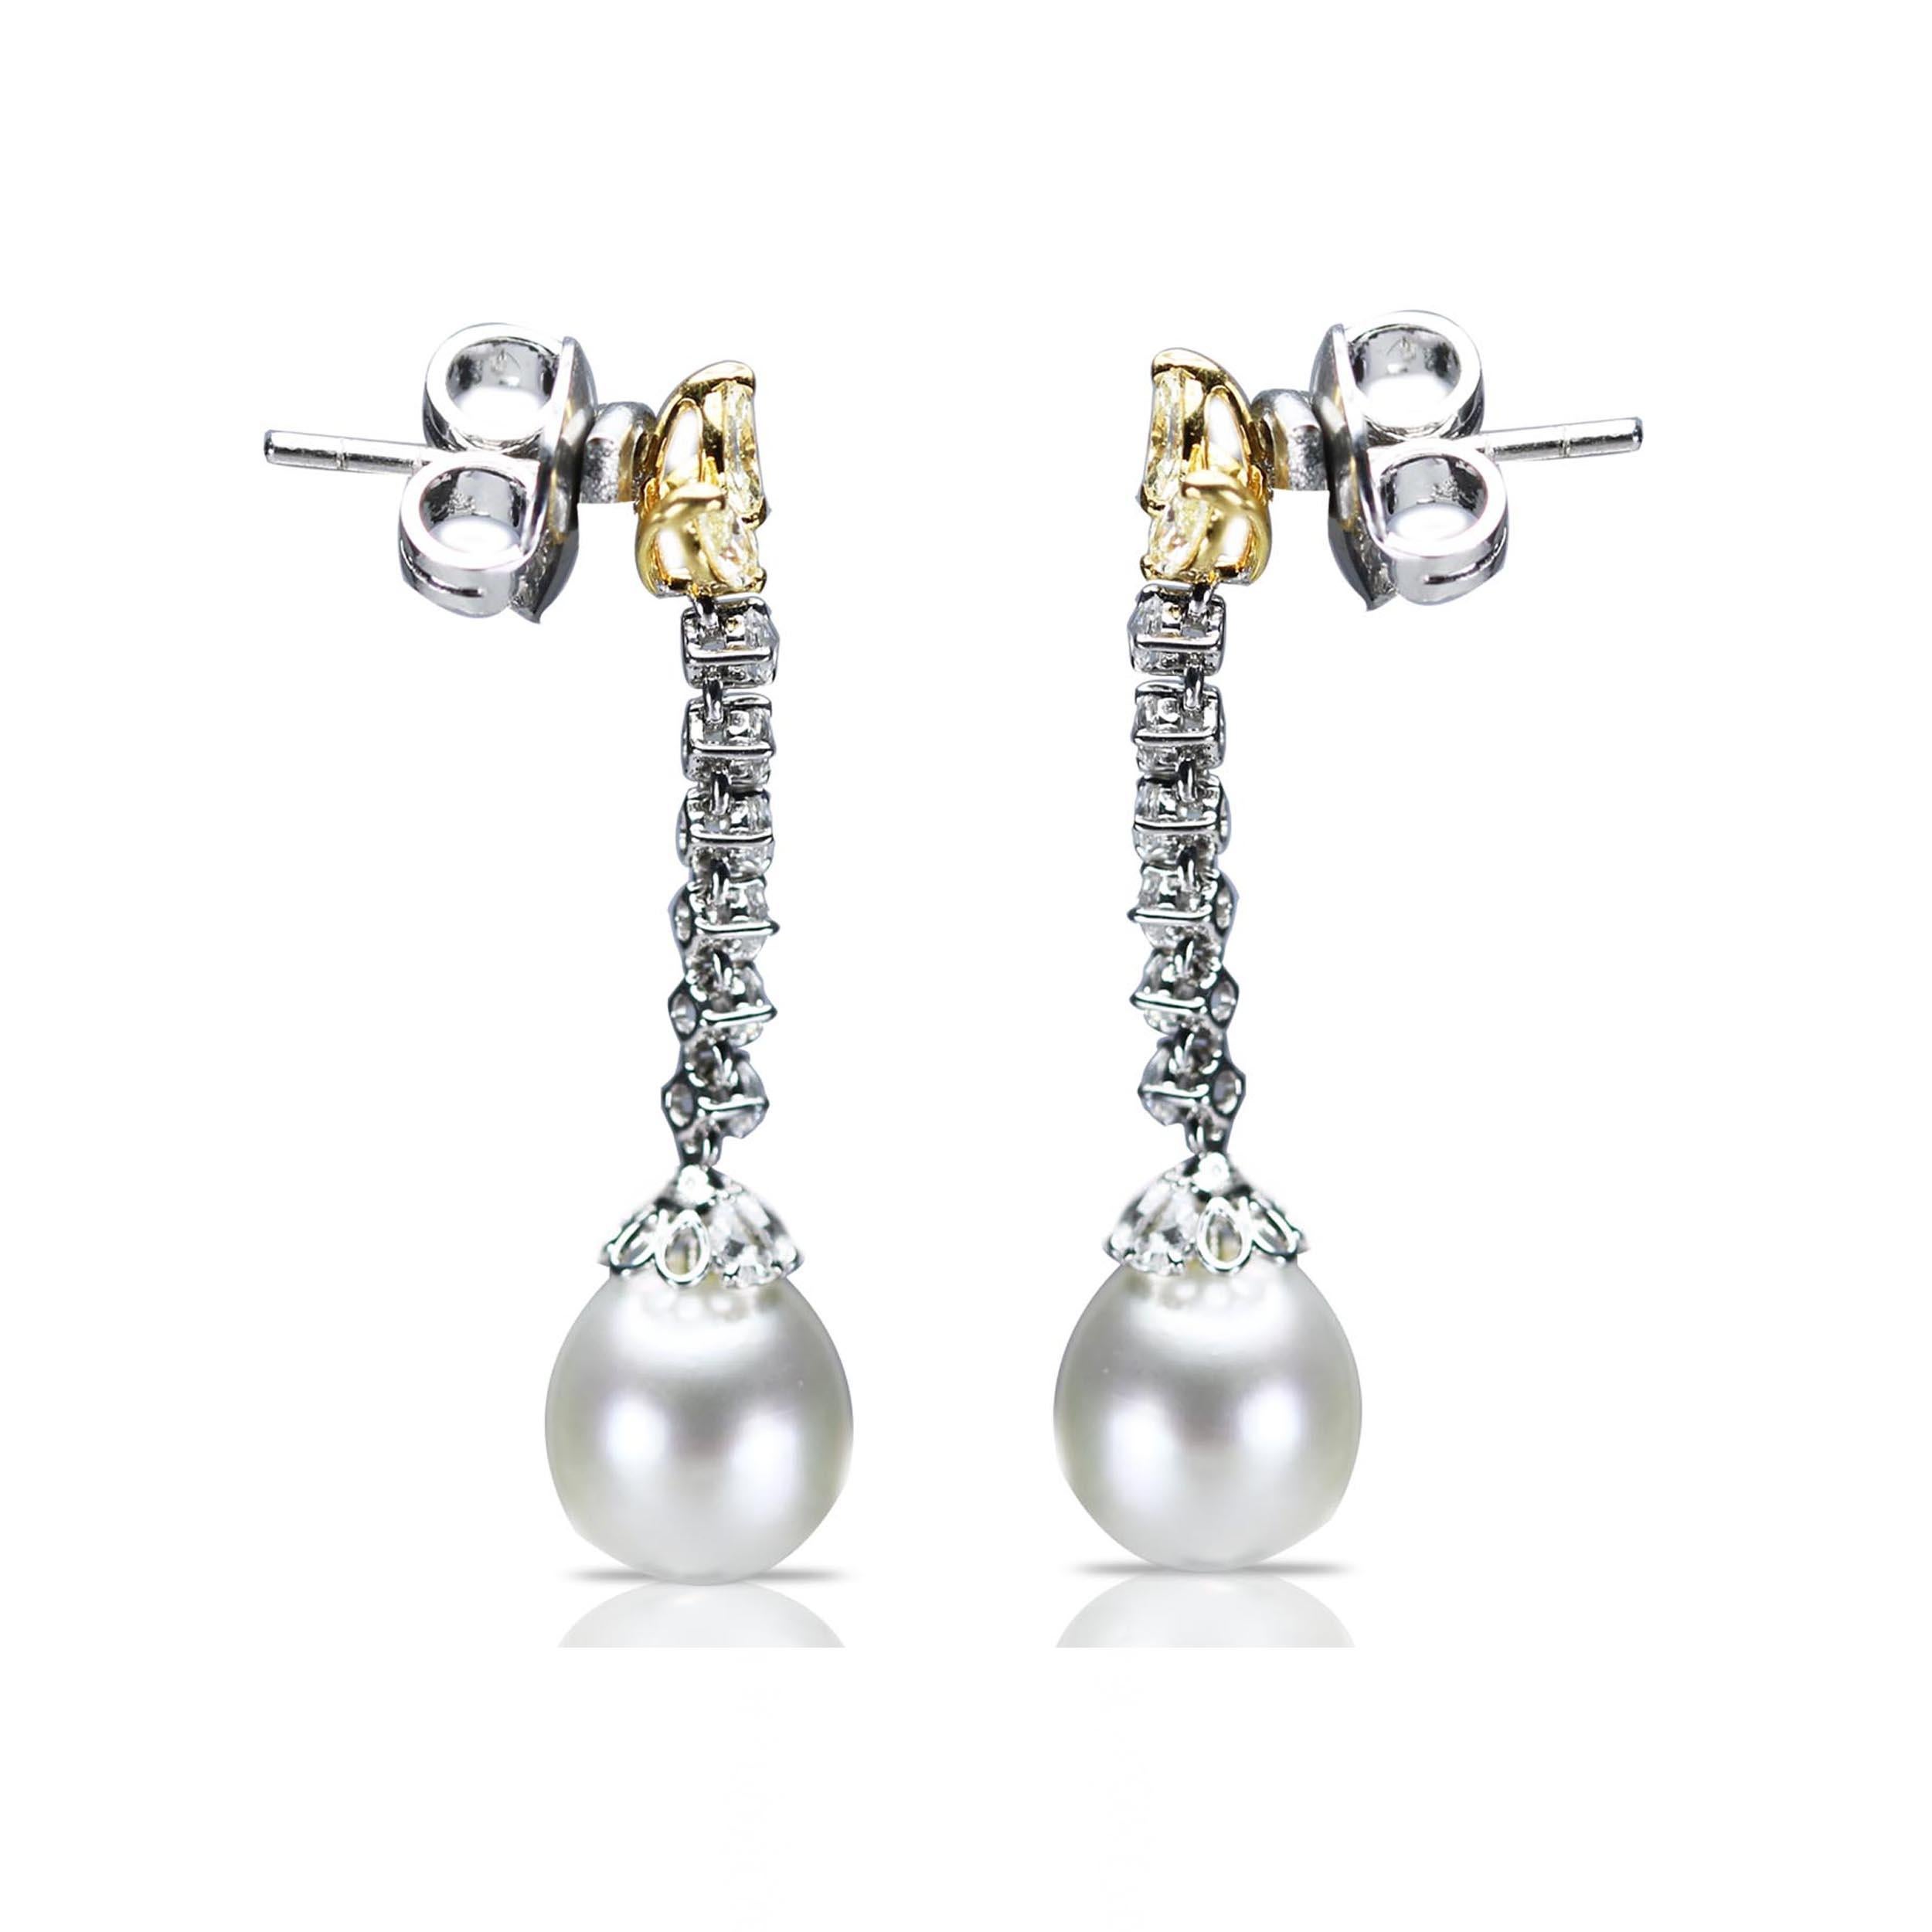 Marquise Cut Studio Rêves Rose cut Diamonds and South Sea Pearls Earrings in 18 Karat Gold For Sale